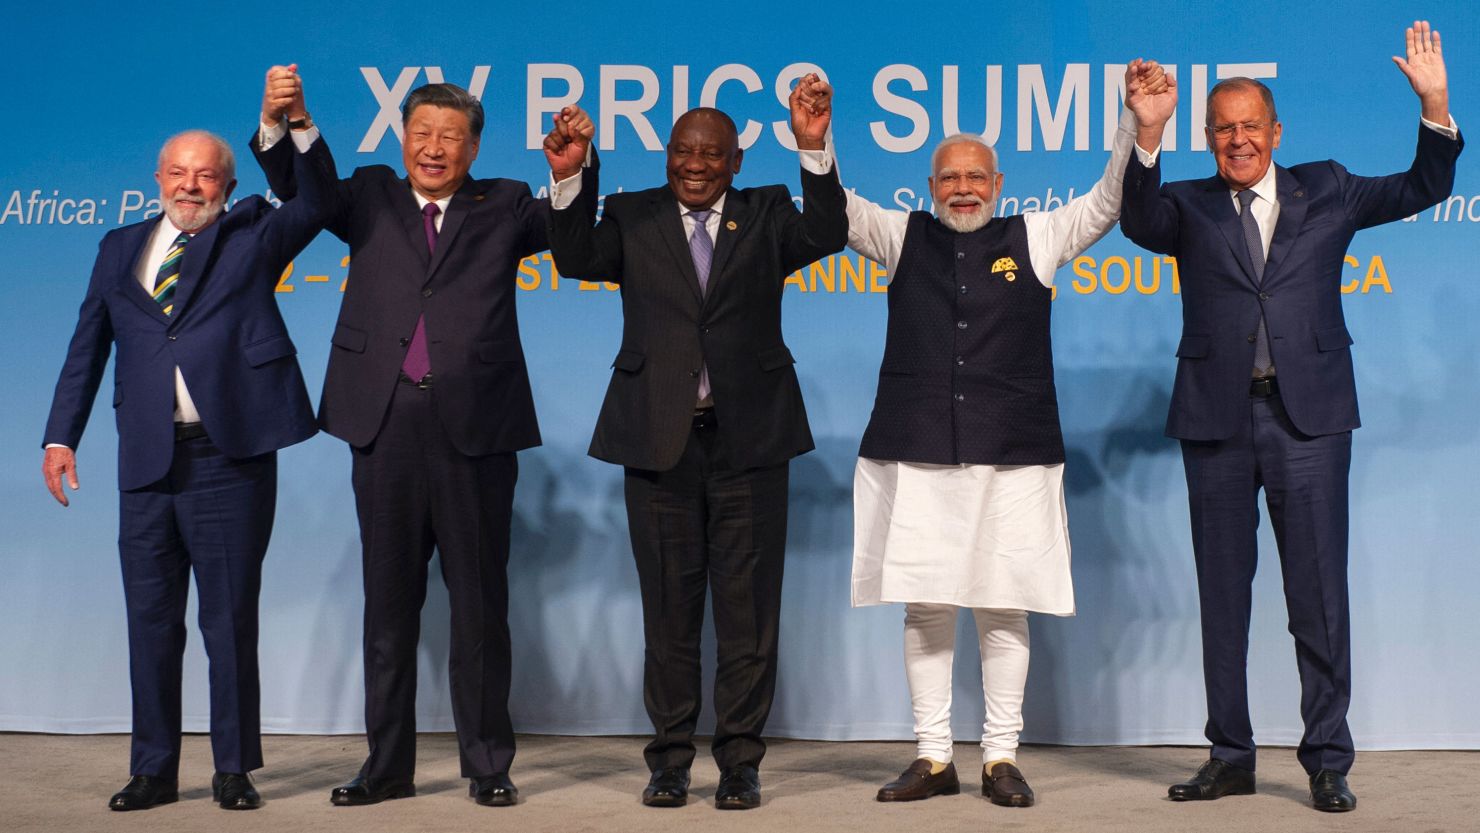 From left: Brazil's President Luiz Inacio Lula da Silva, China's President Xi Jinping, South African President Cyril Ramaphosa, Indian Prime Minister Narendra Modi and Russia's Foreign Minister Sergei Lavrov raise their arms as they pose for a group photograph, at the BRICS Summit in Johannesburg on August 23, 2023. (Photo by ALET PRETORIUS / POOL / AFP) (Photo by ALET PRETORIUS/POOL/AFP via Getty Images)